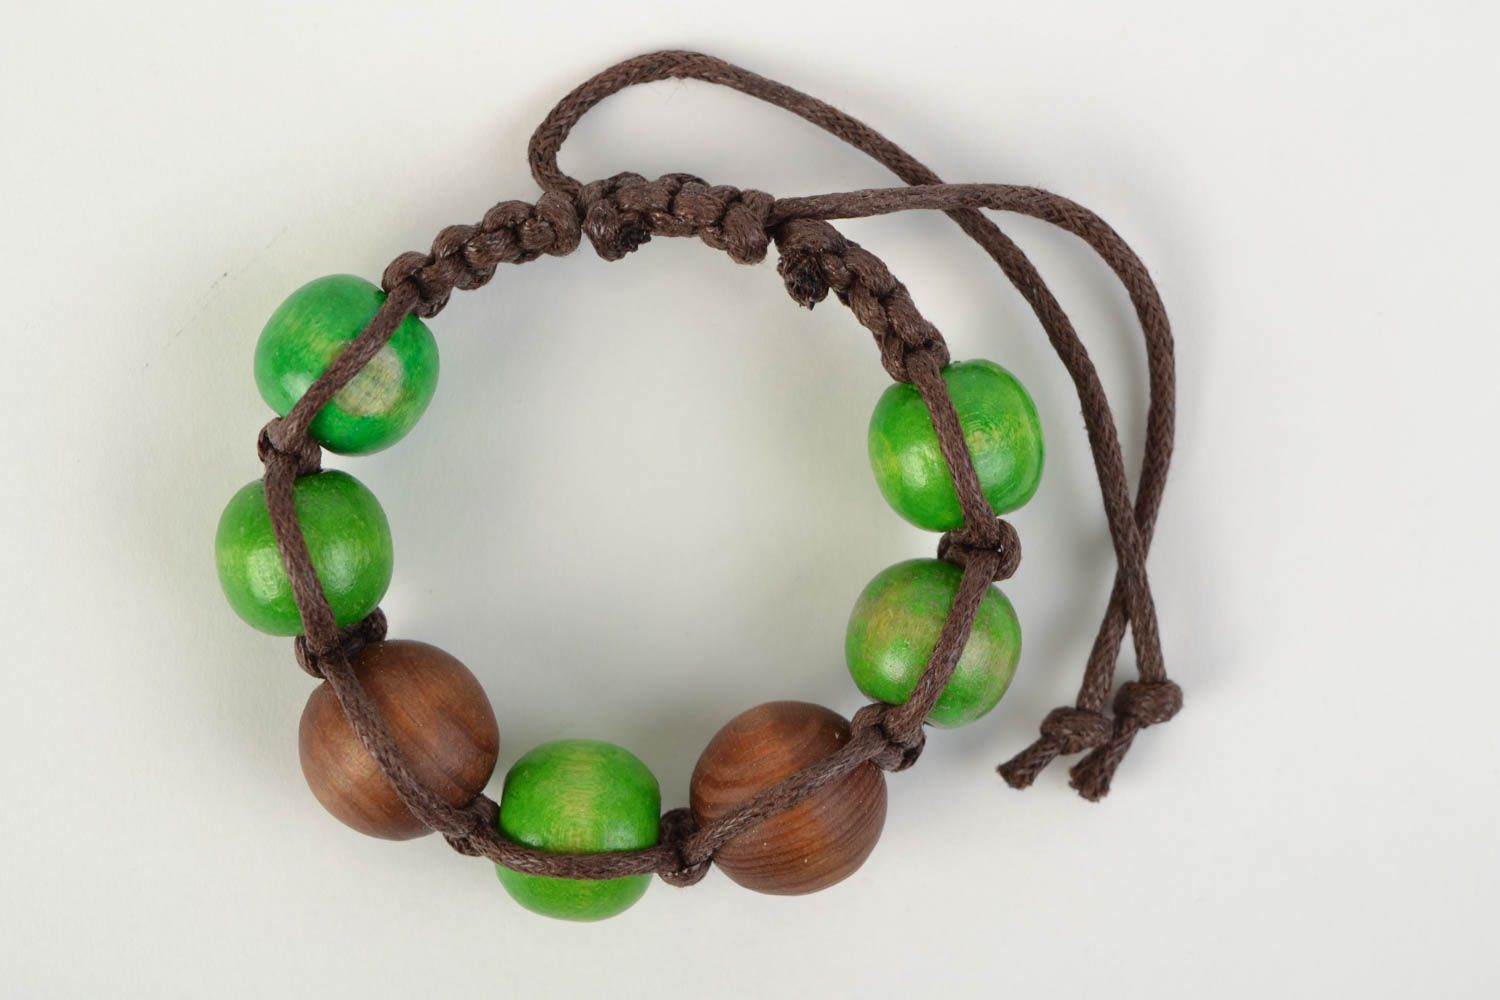 Handmade woven cotton cord bracelet with wooden beads photo 6